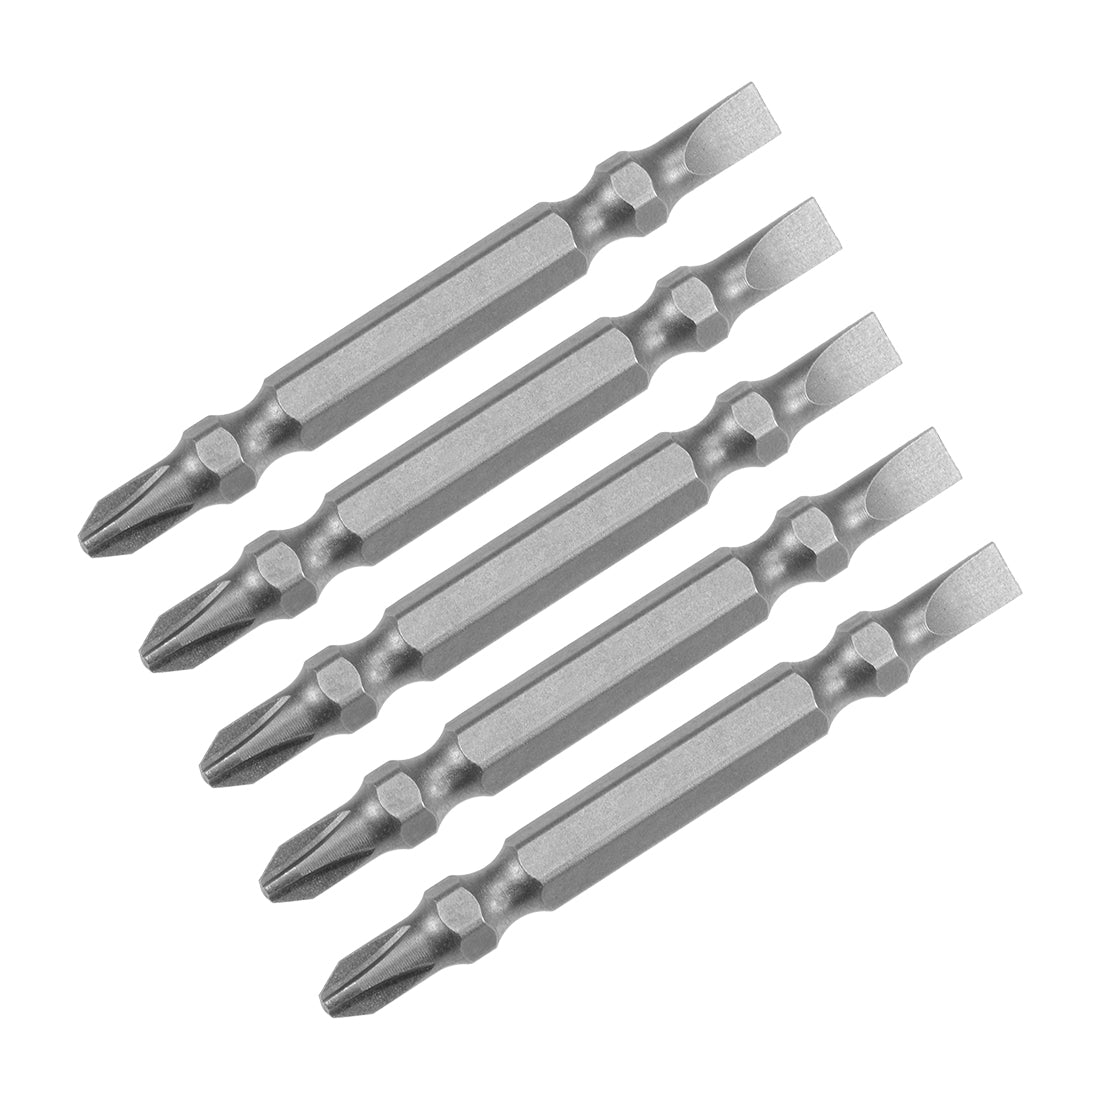 uxcell Uxcell 5 Pcs PH2/SL5 Magnetic Double Ended Screwdriver Bits, 1/4 Inch Hex Shank 2.56-inch Length S2 Power Tool